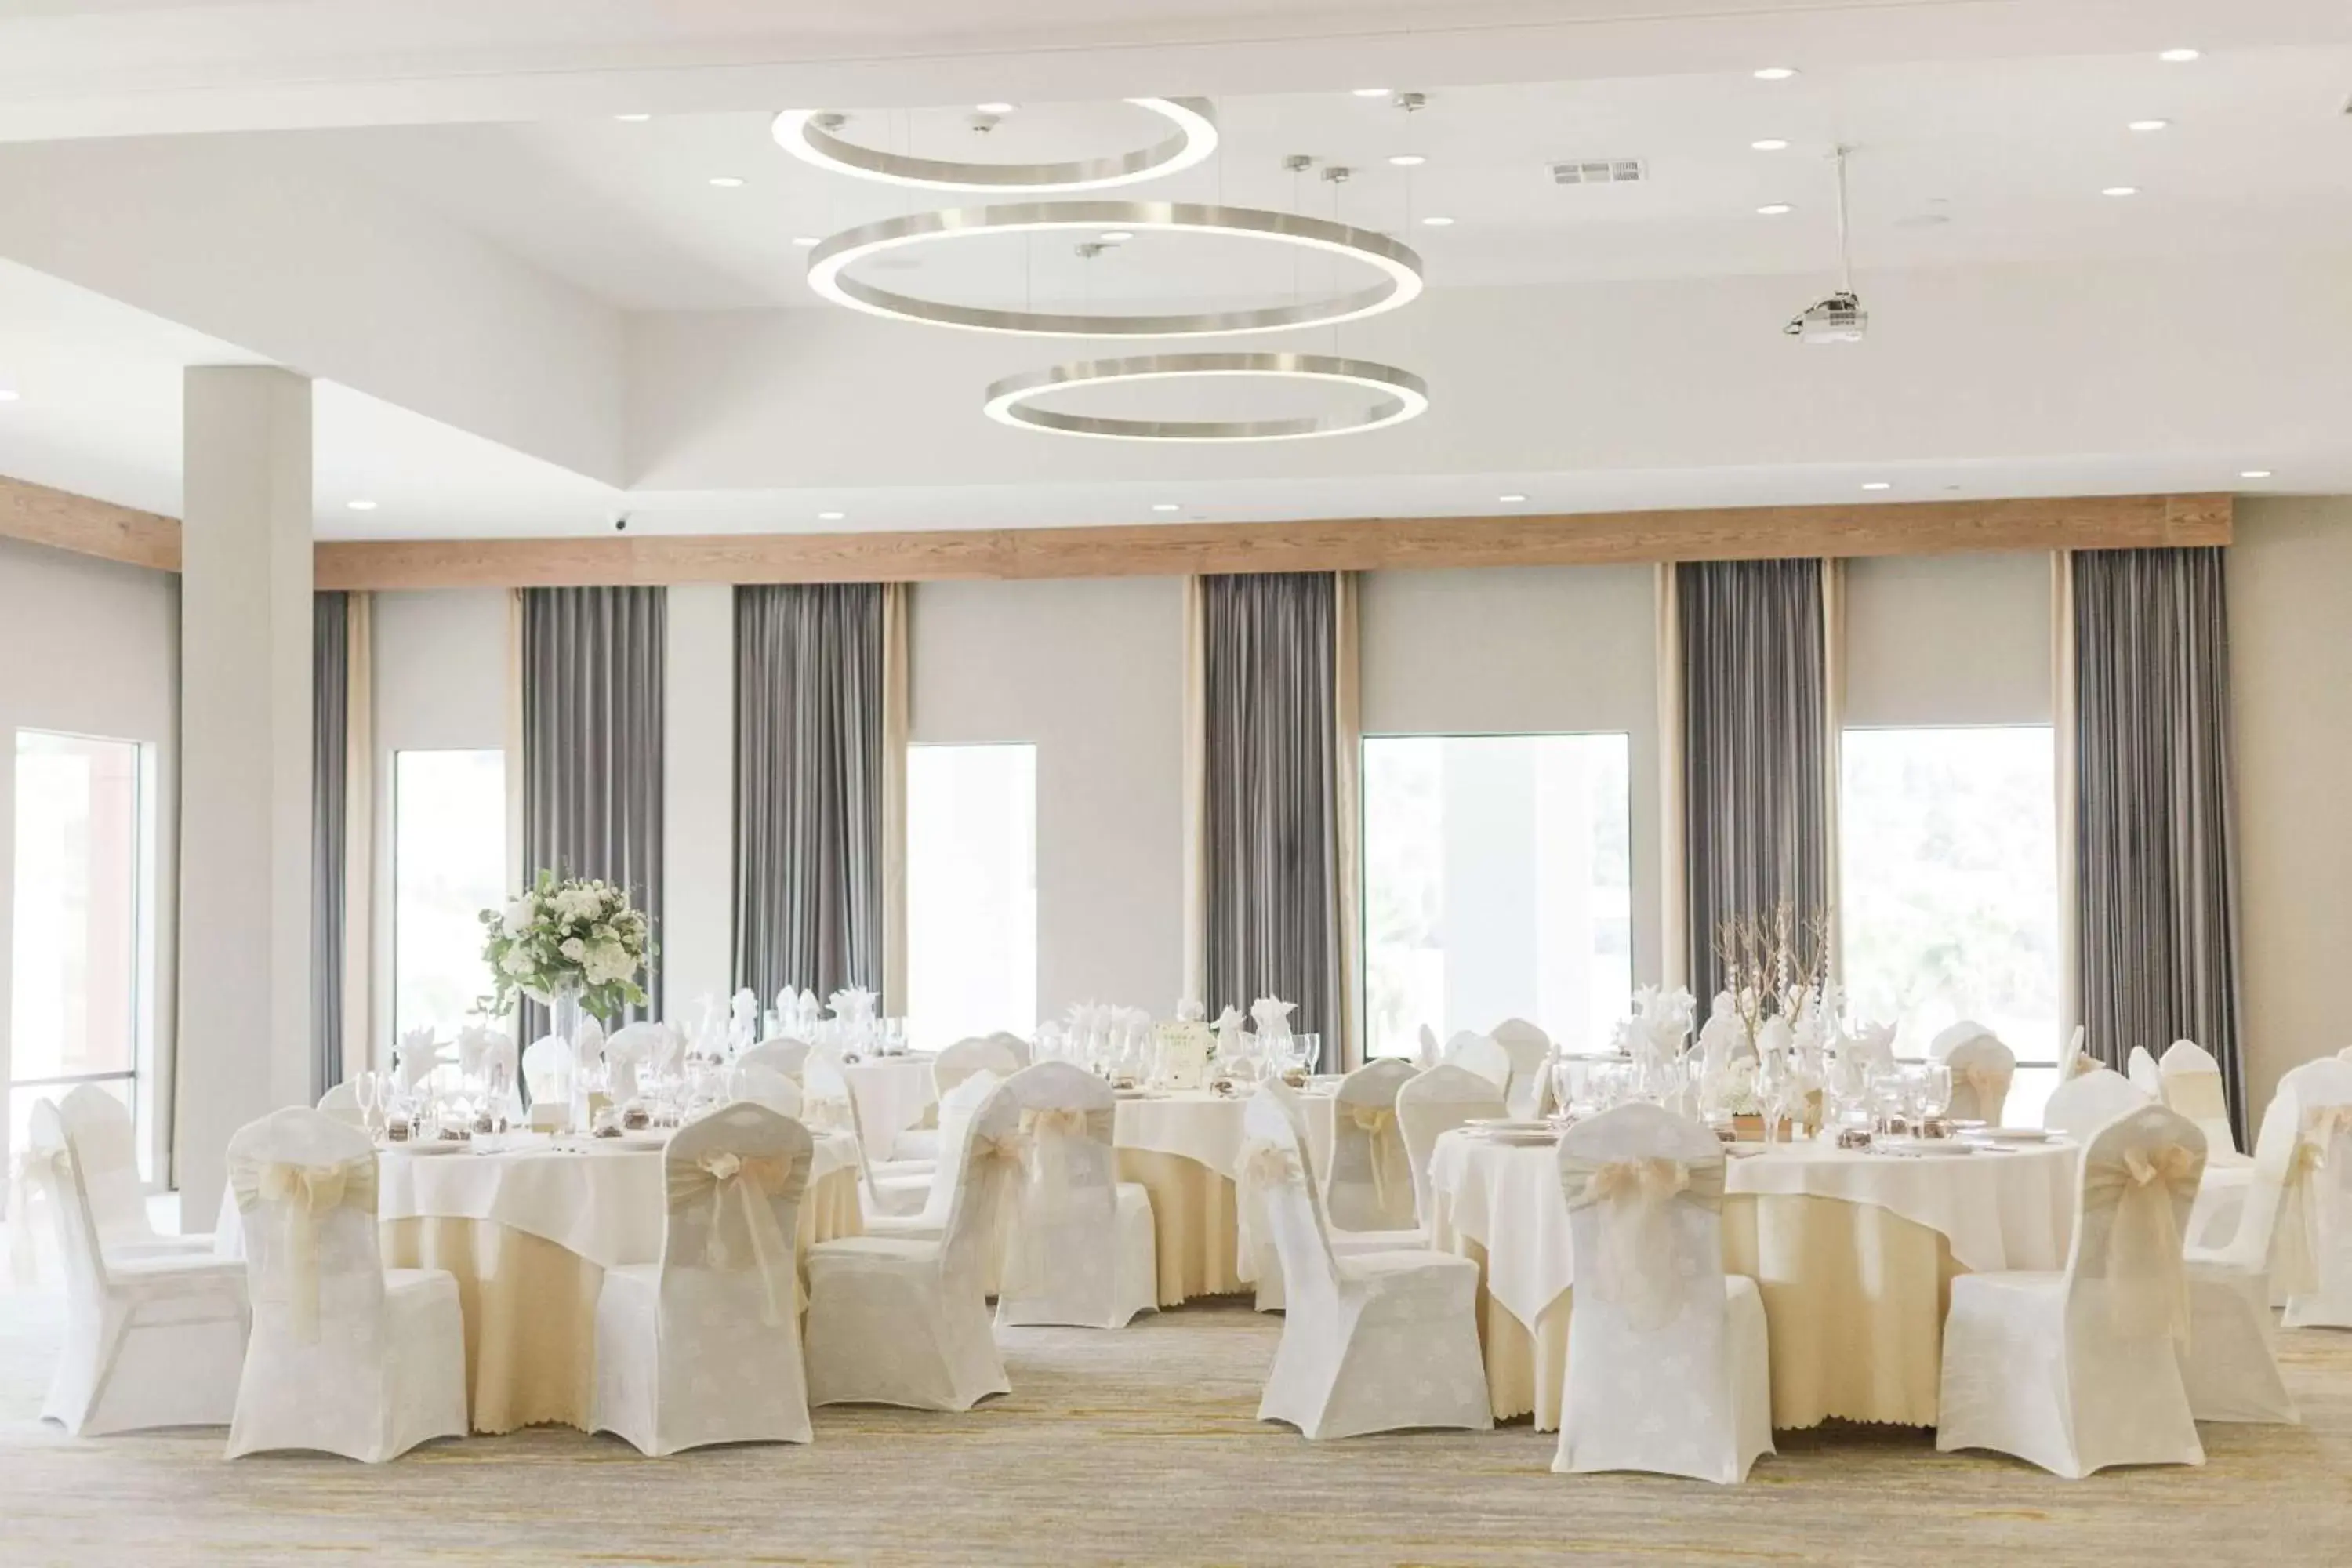 Meeting/conference room, Banquet Facilities in Doubletree By Hilton Pomona